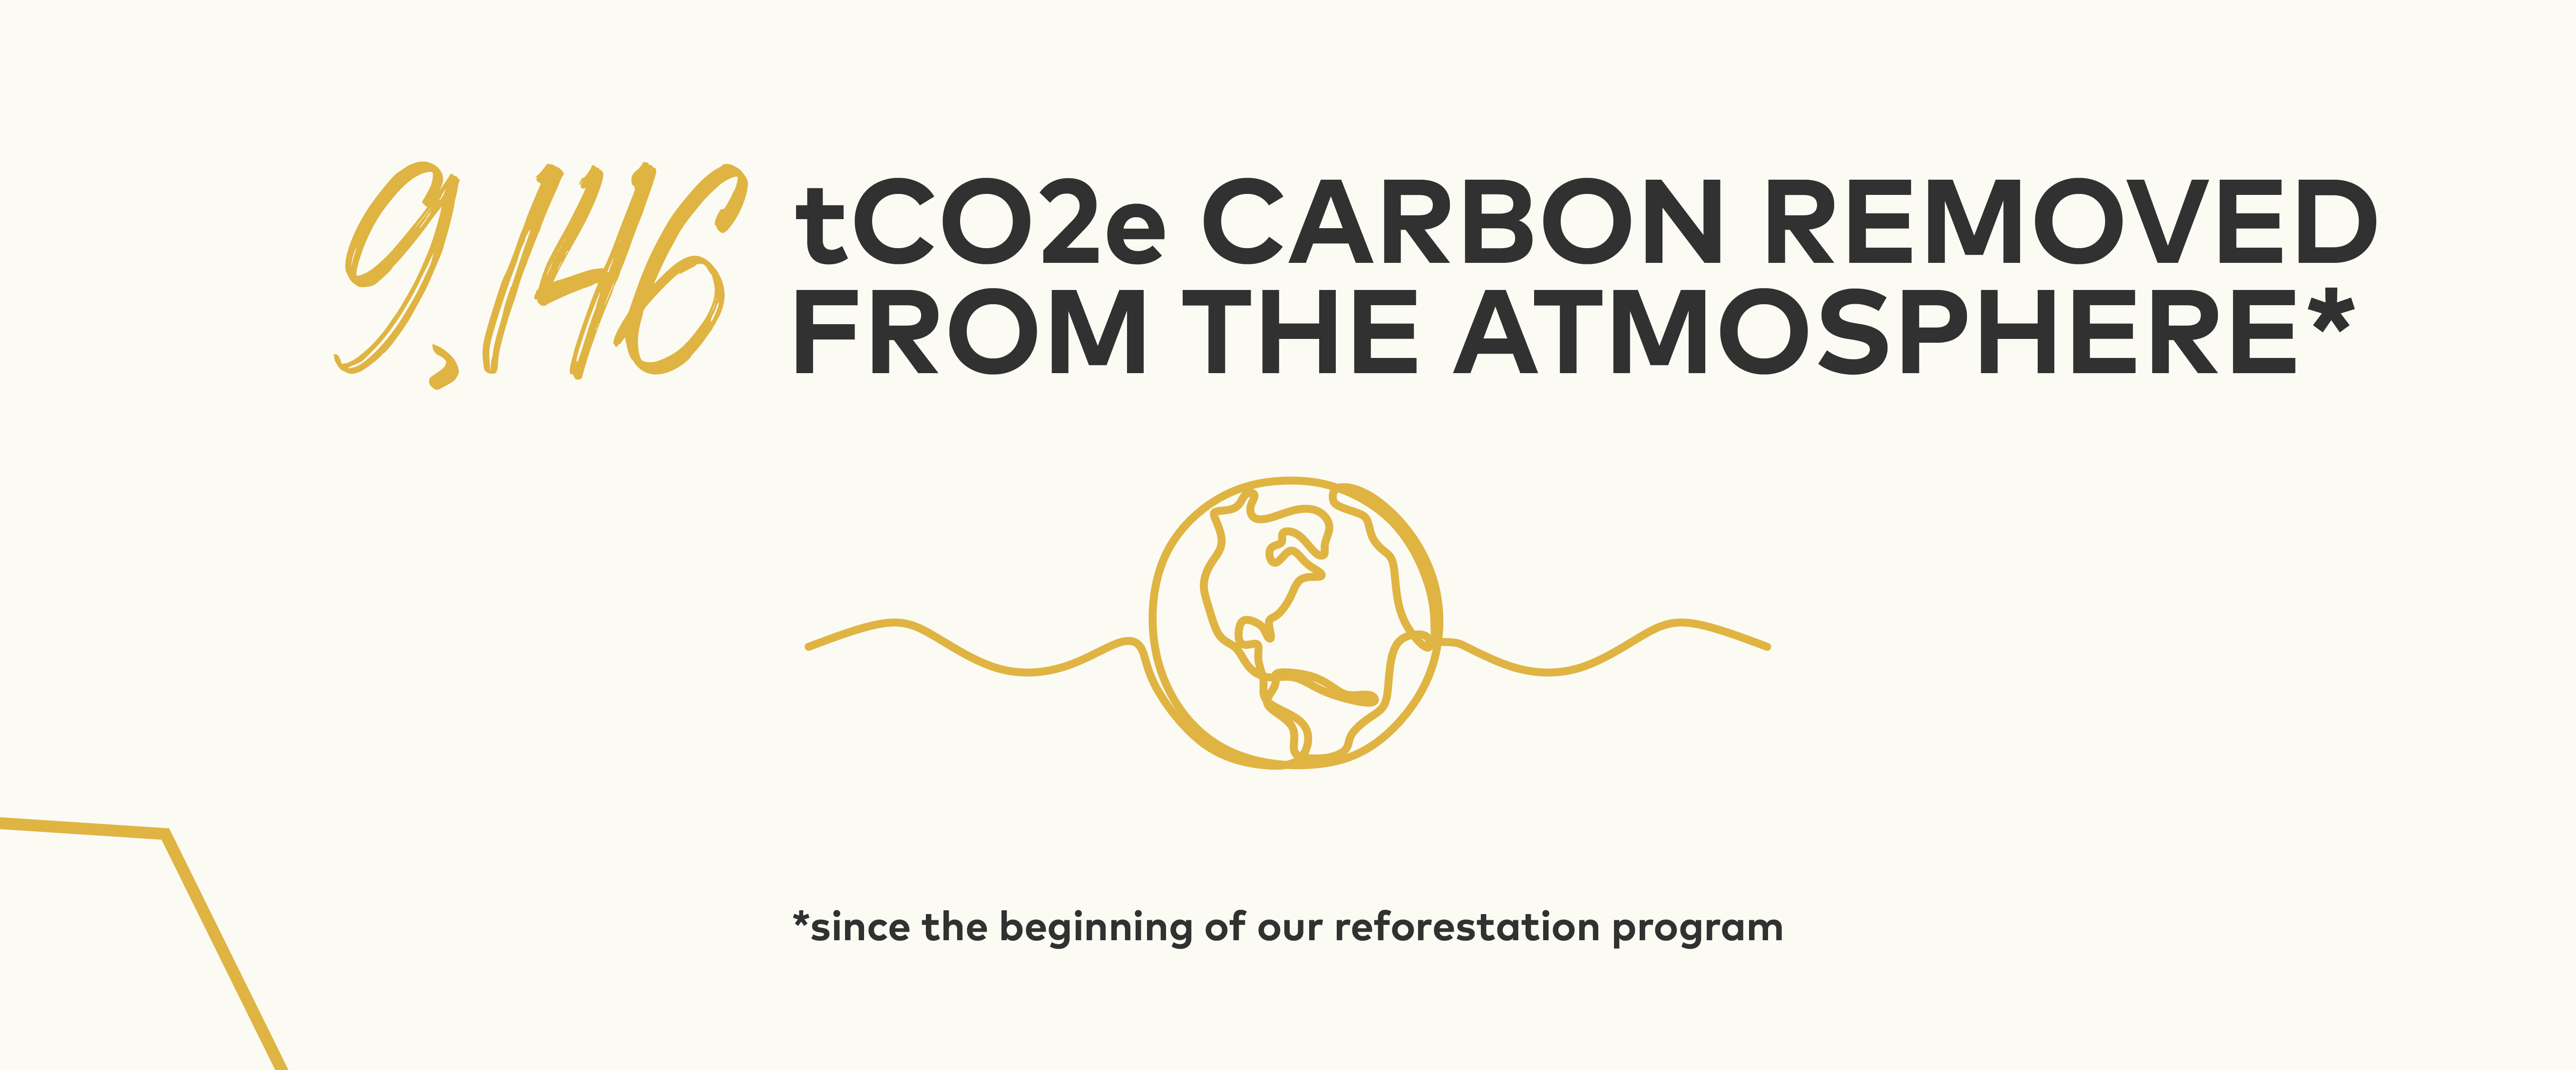 9,146 tCO2e Carbon removed from the atmosphere